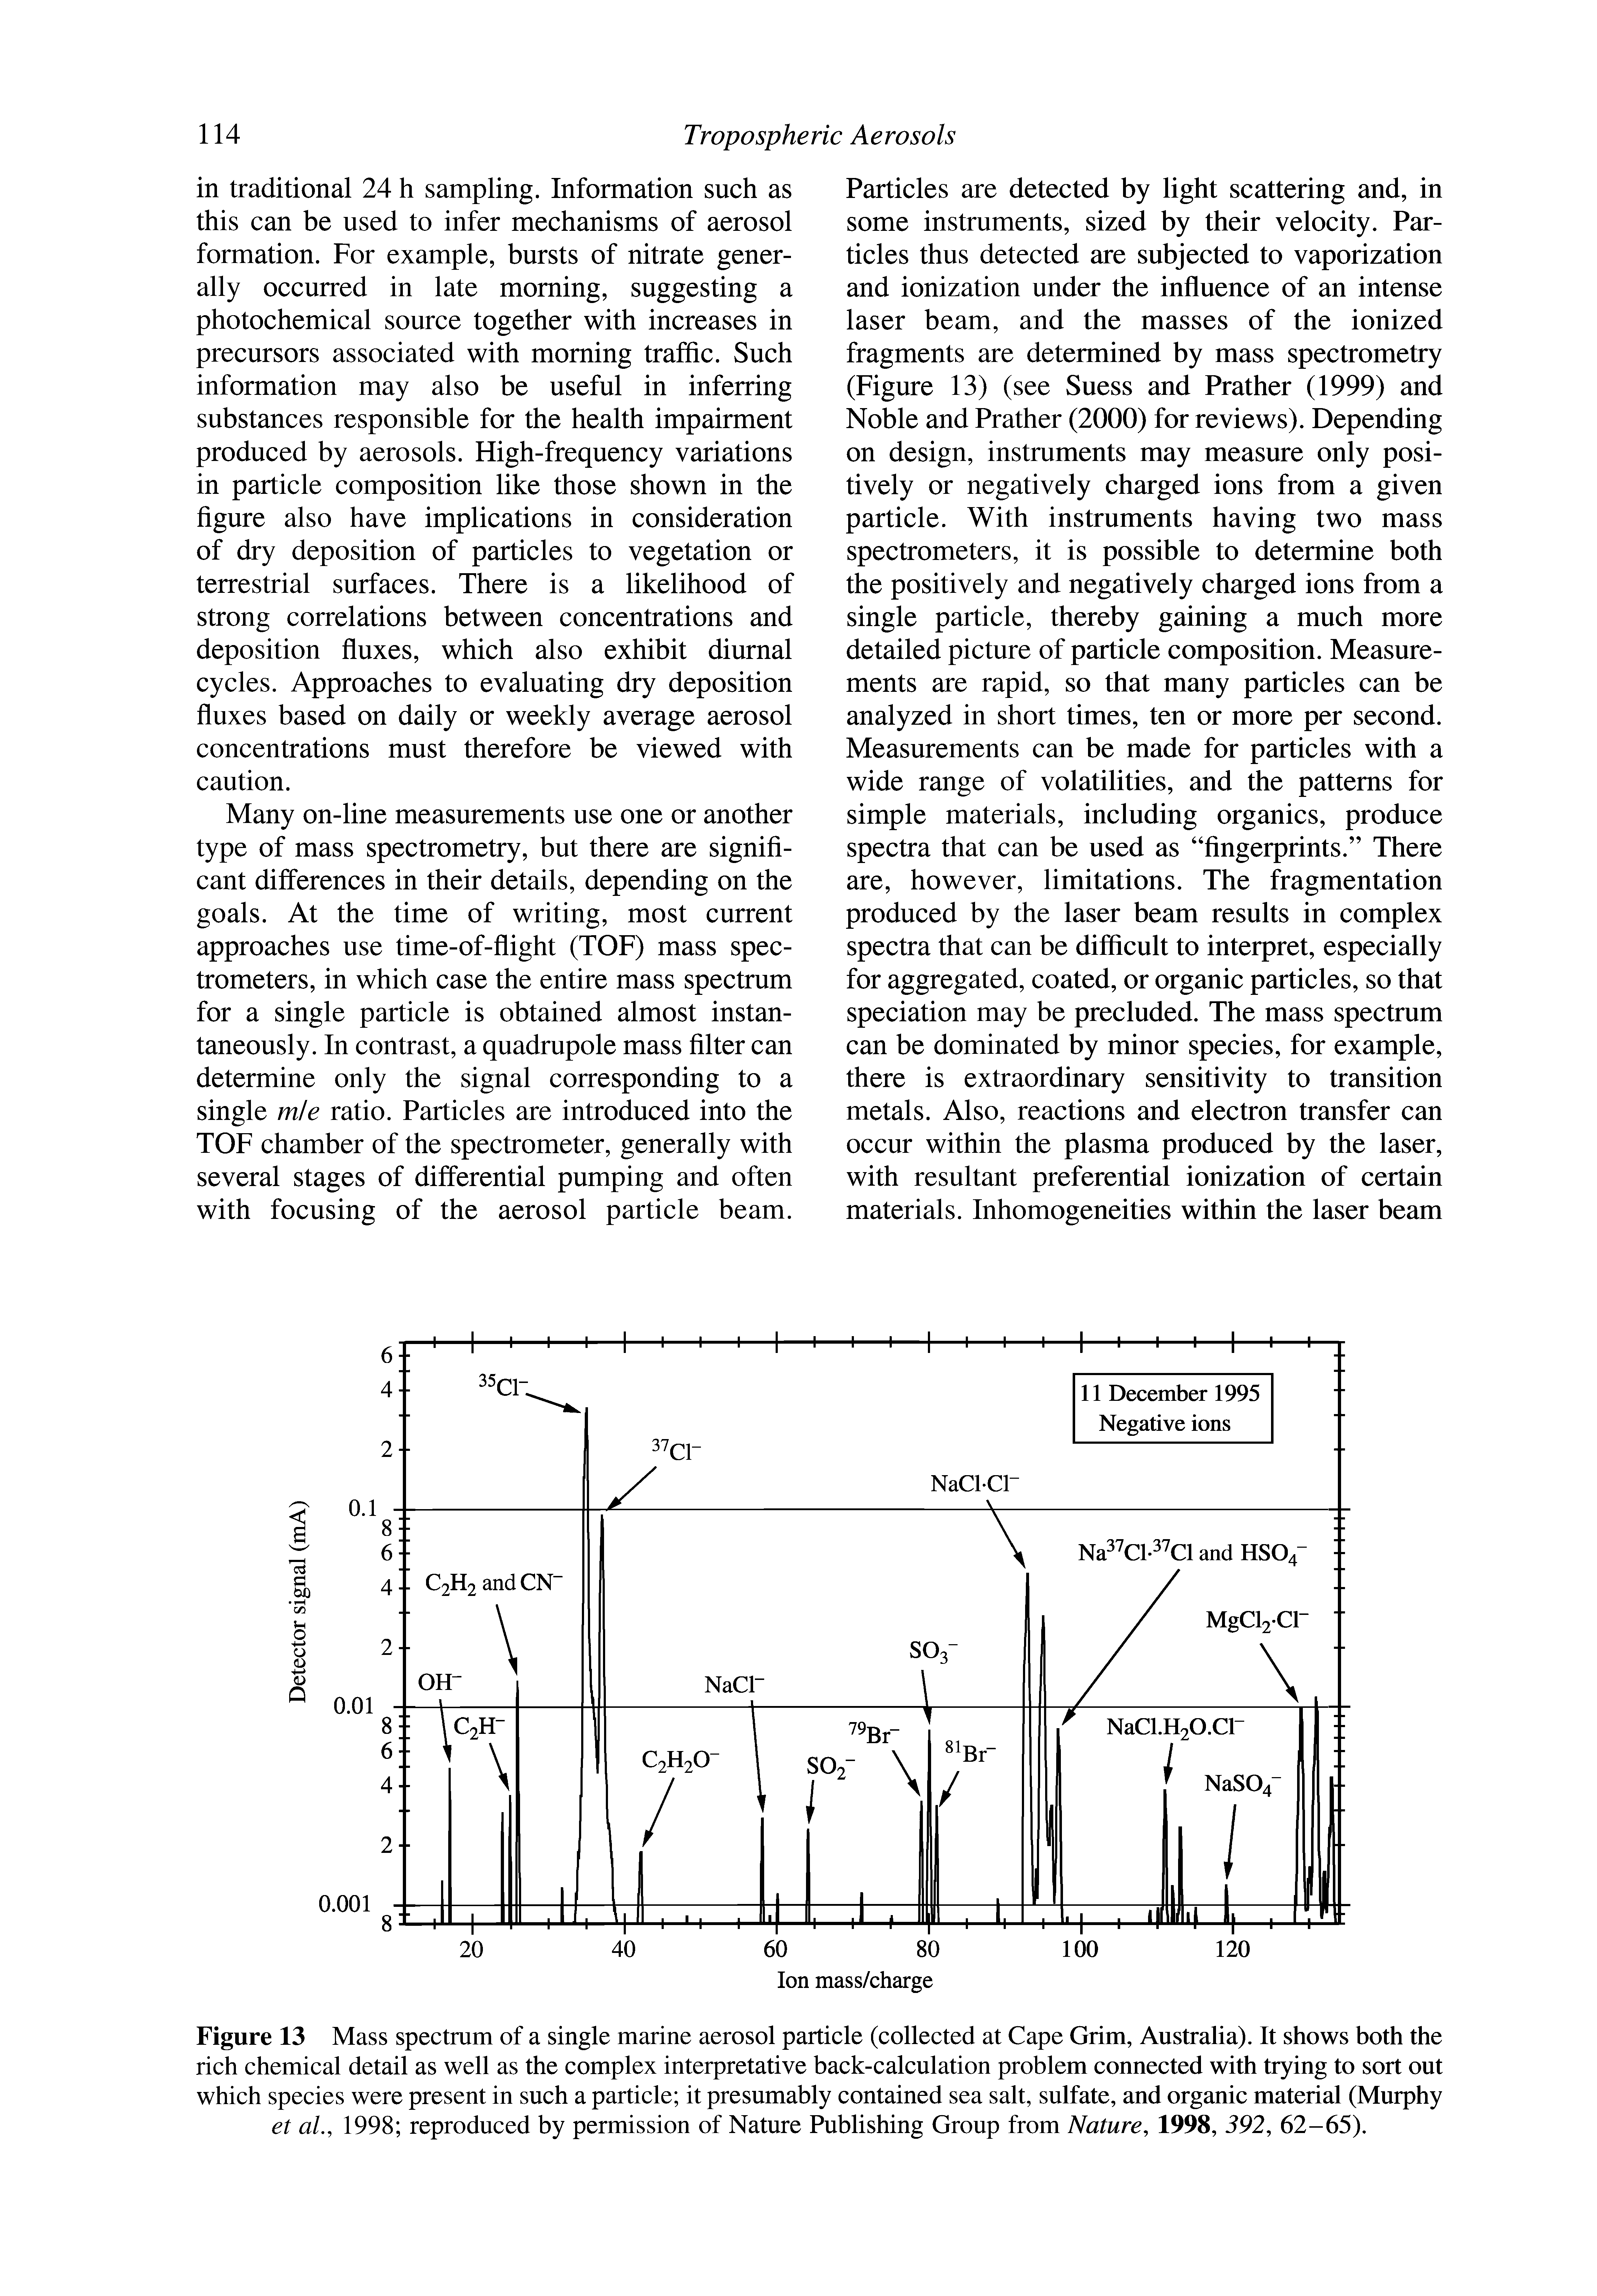 Figure 13 Mass spectrum of a single marine aerosol particle (collected at Cape Grim, Australia). It shows both the rich chemical detail as well as the complex interpretative back-calculation problem connected with trying to sort out which species were present in such a particle it presumably contained sea salt, sulfate, and organic material (Murphy et aL, 1998 reproduced by permission of Nature Publishing Group from Nature, 1998, 392, 62-65).